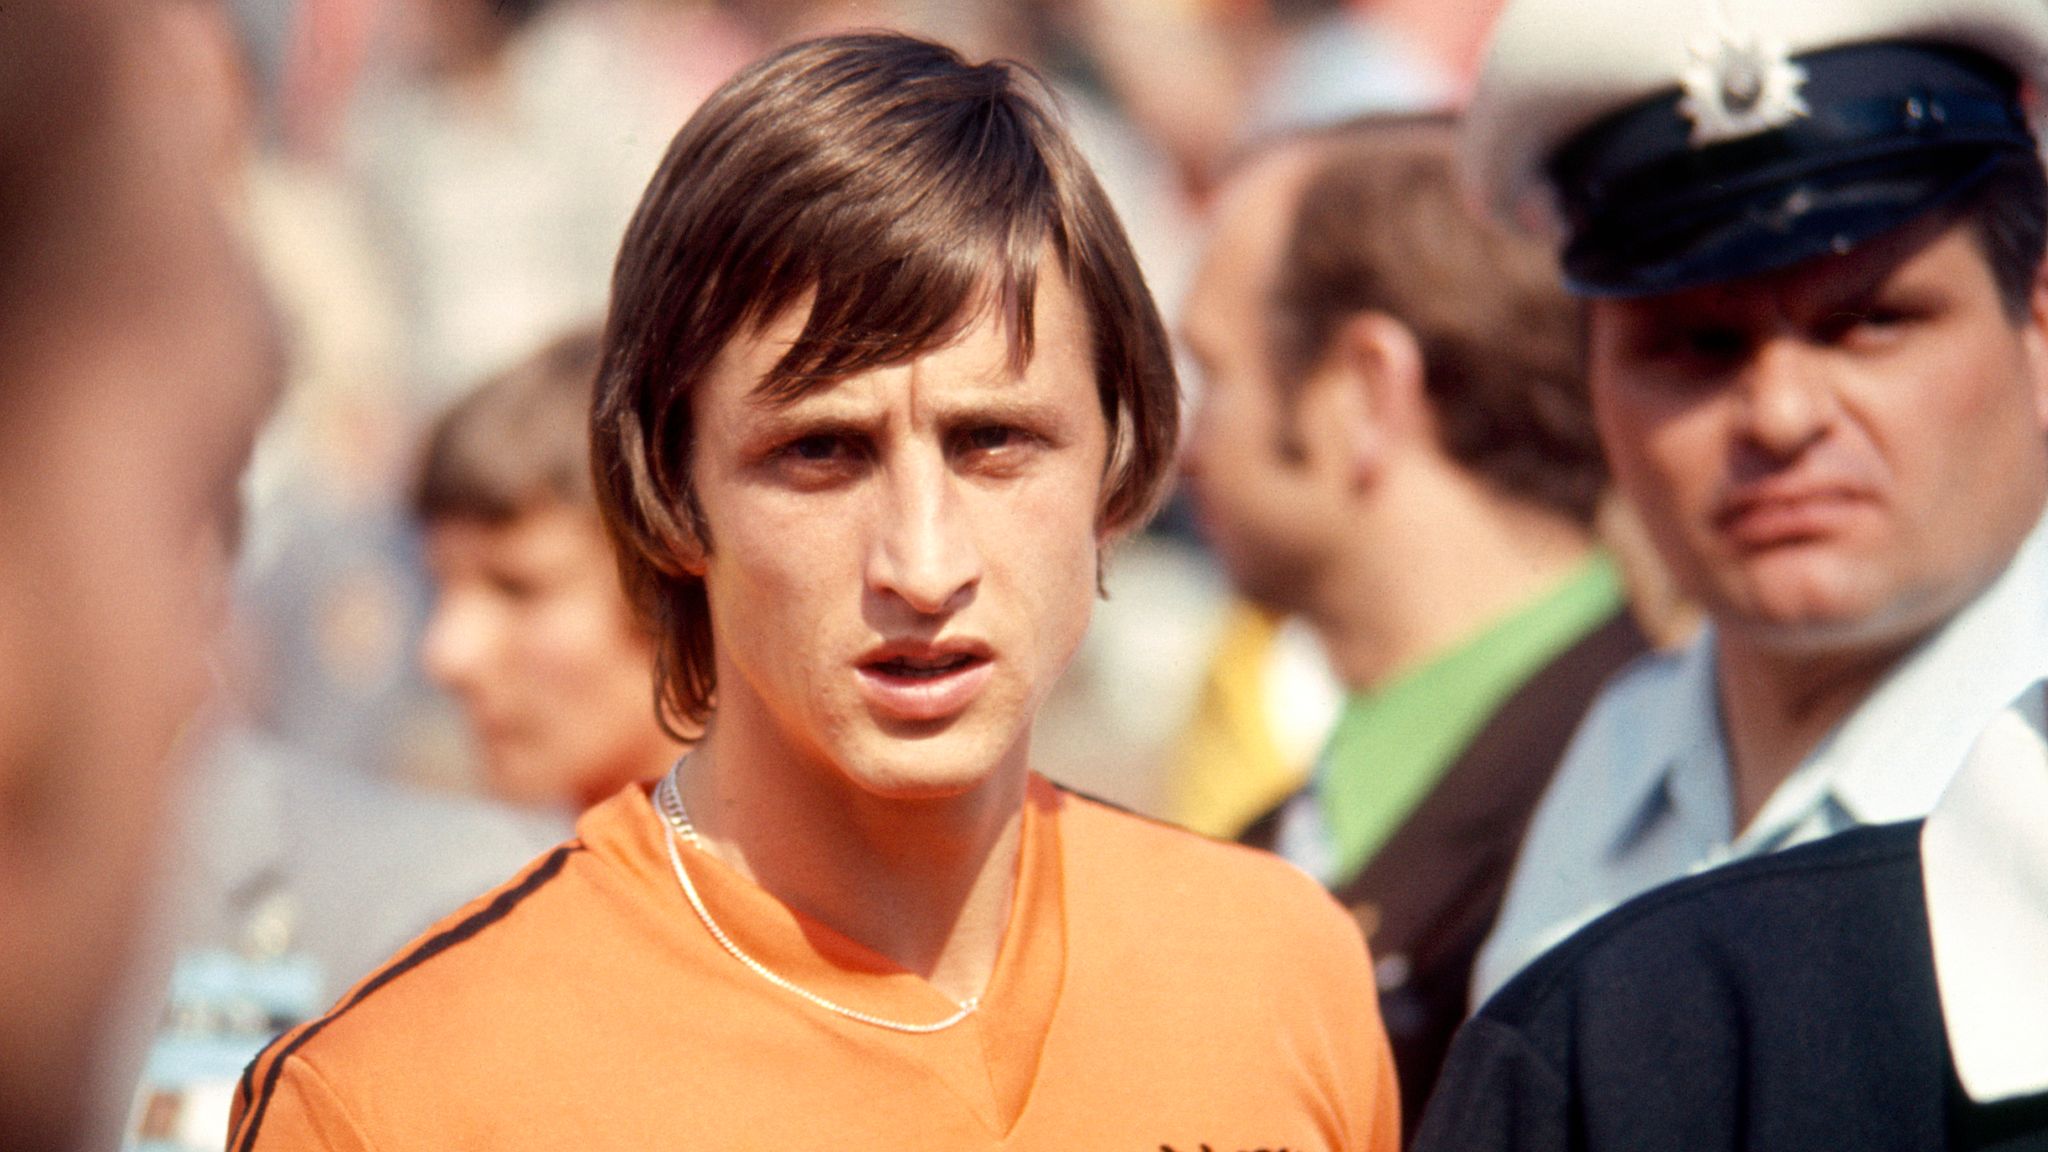 Johan Cruyff: The Barcelona and Netherlands legend in quotes | Football News | Sky Sports